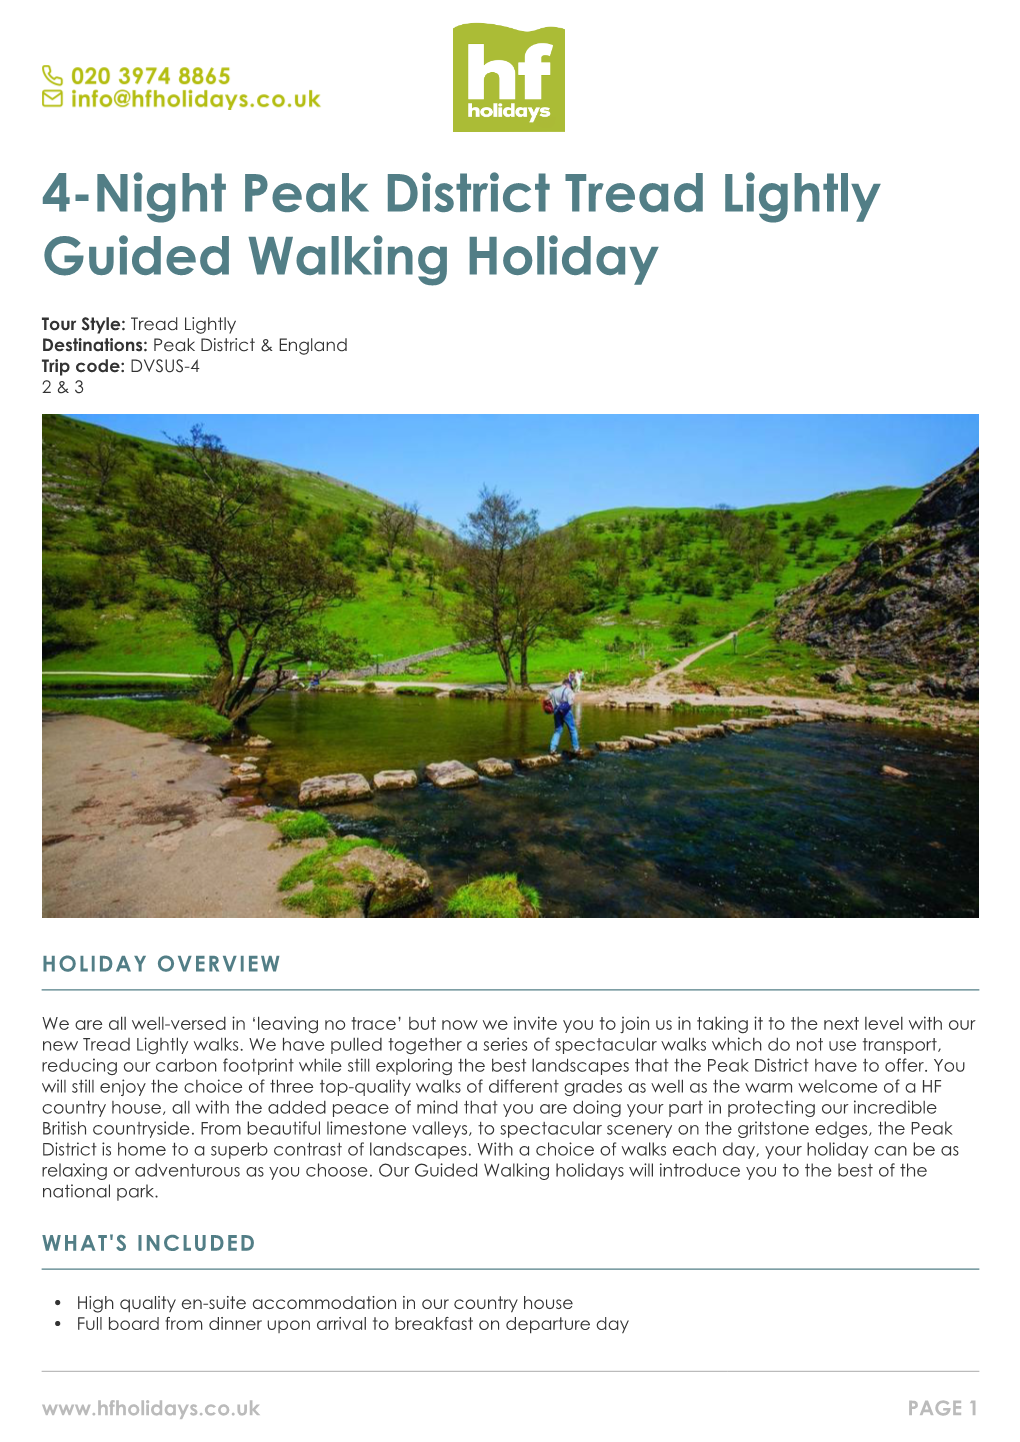 4-Night Peak District Tread Lightly Guided Walking Holiday